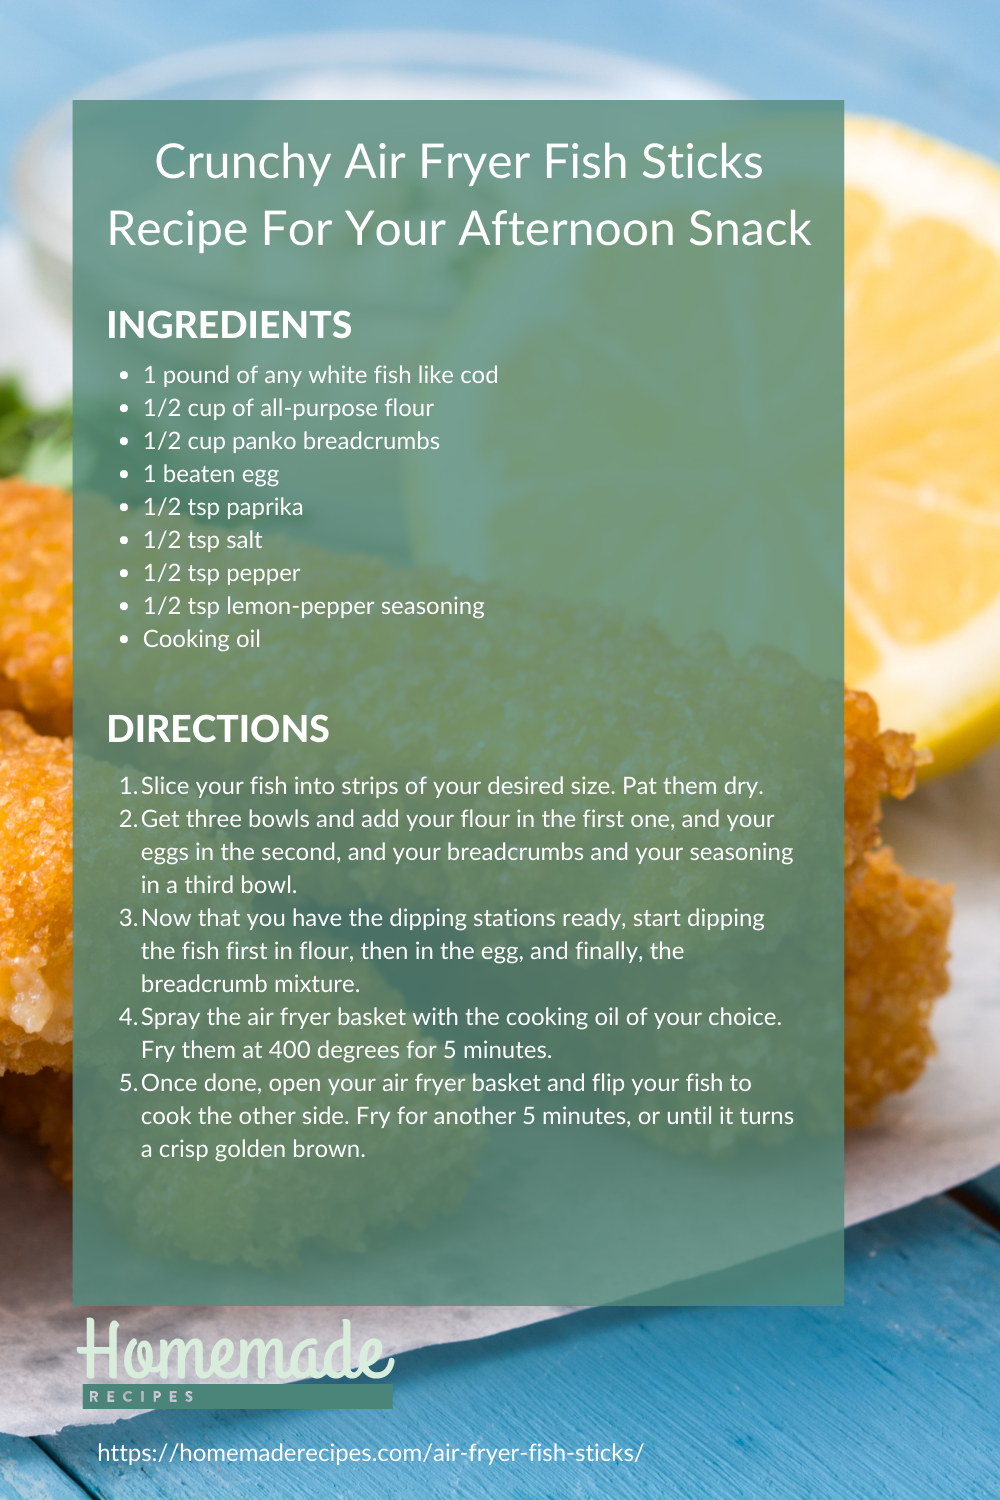 recipe card | Crunchy Air Fryer Fish Sticks Recipe For Your Afternoon Snack